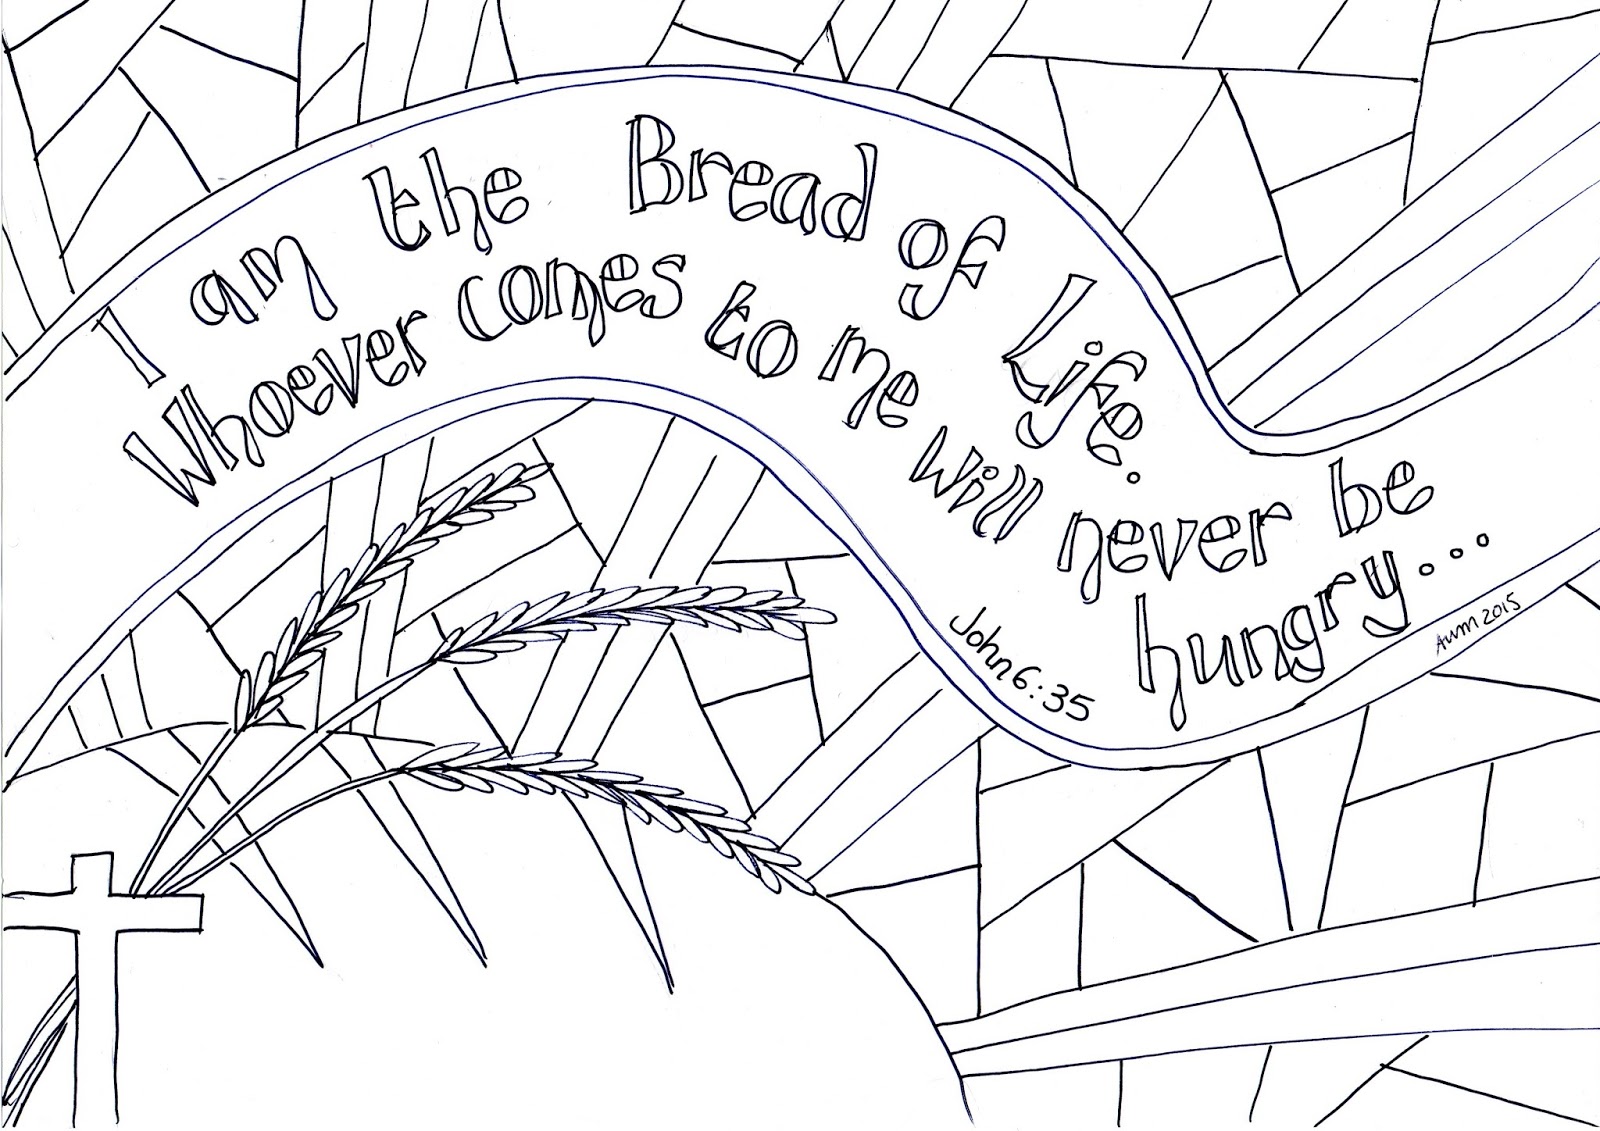 Flame: Creative Children's Ministry: I Am the Bread of Life Reflective  Colouring Sheet